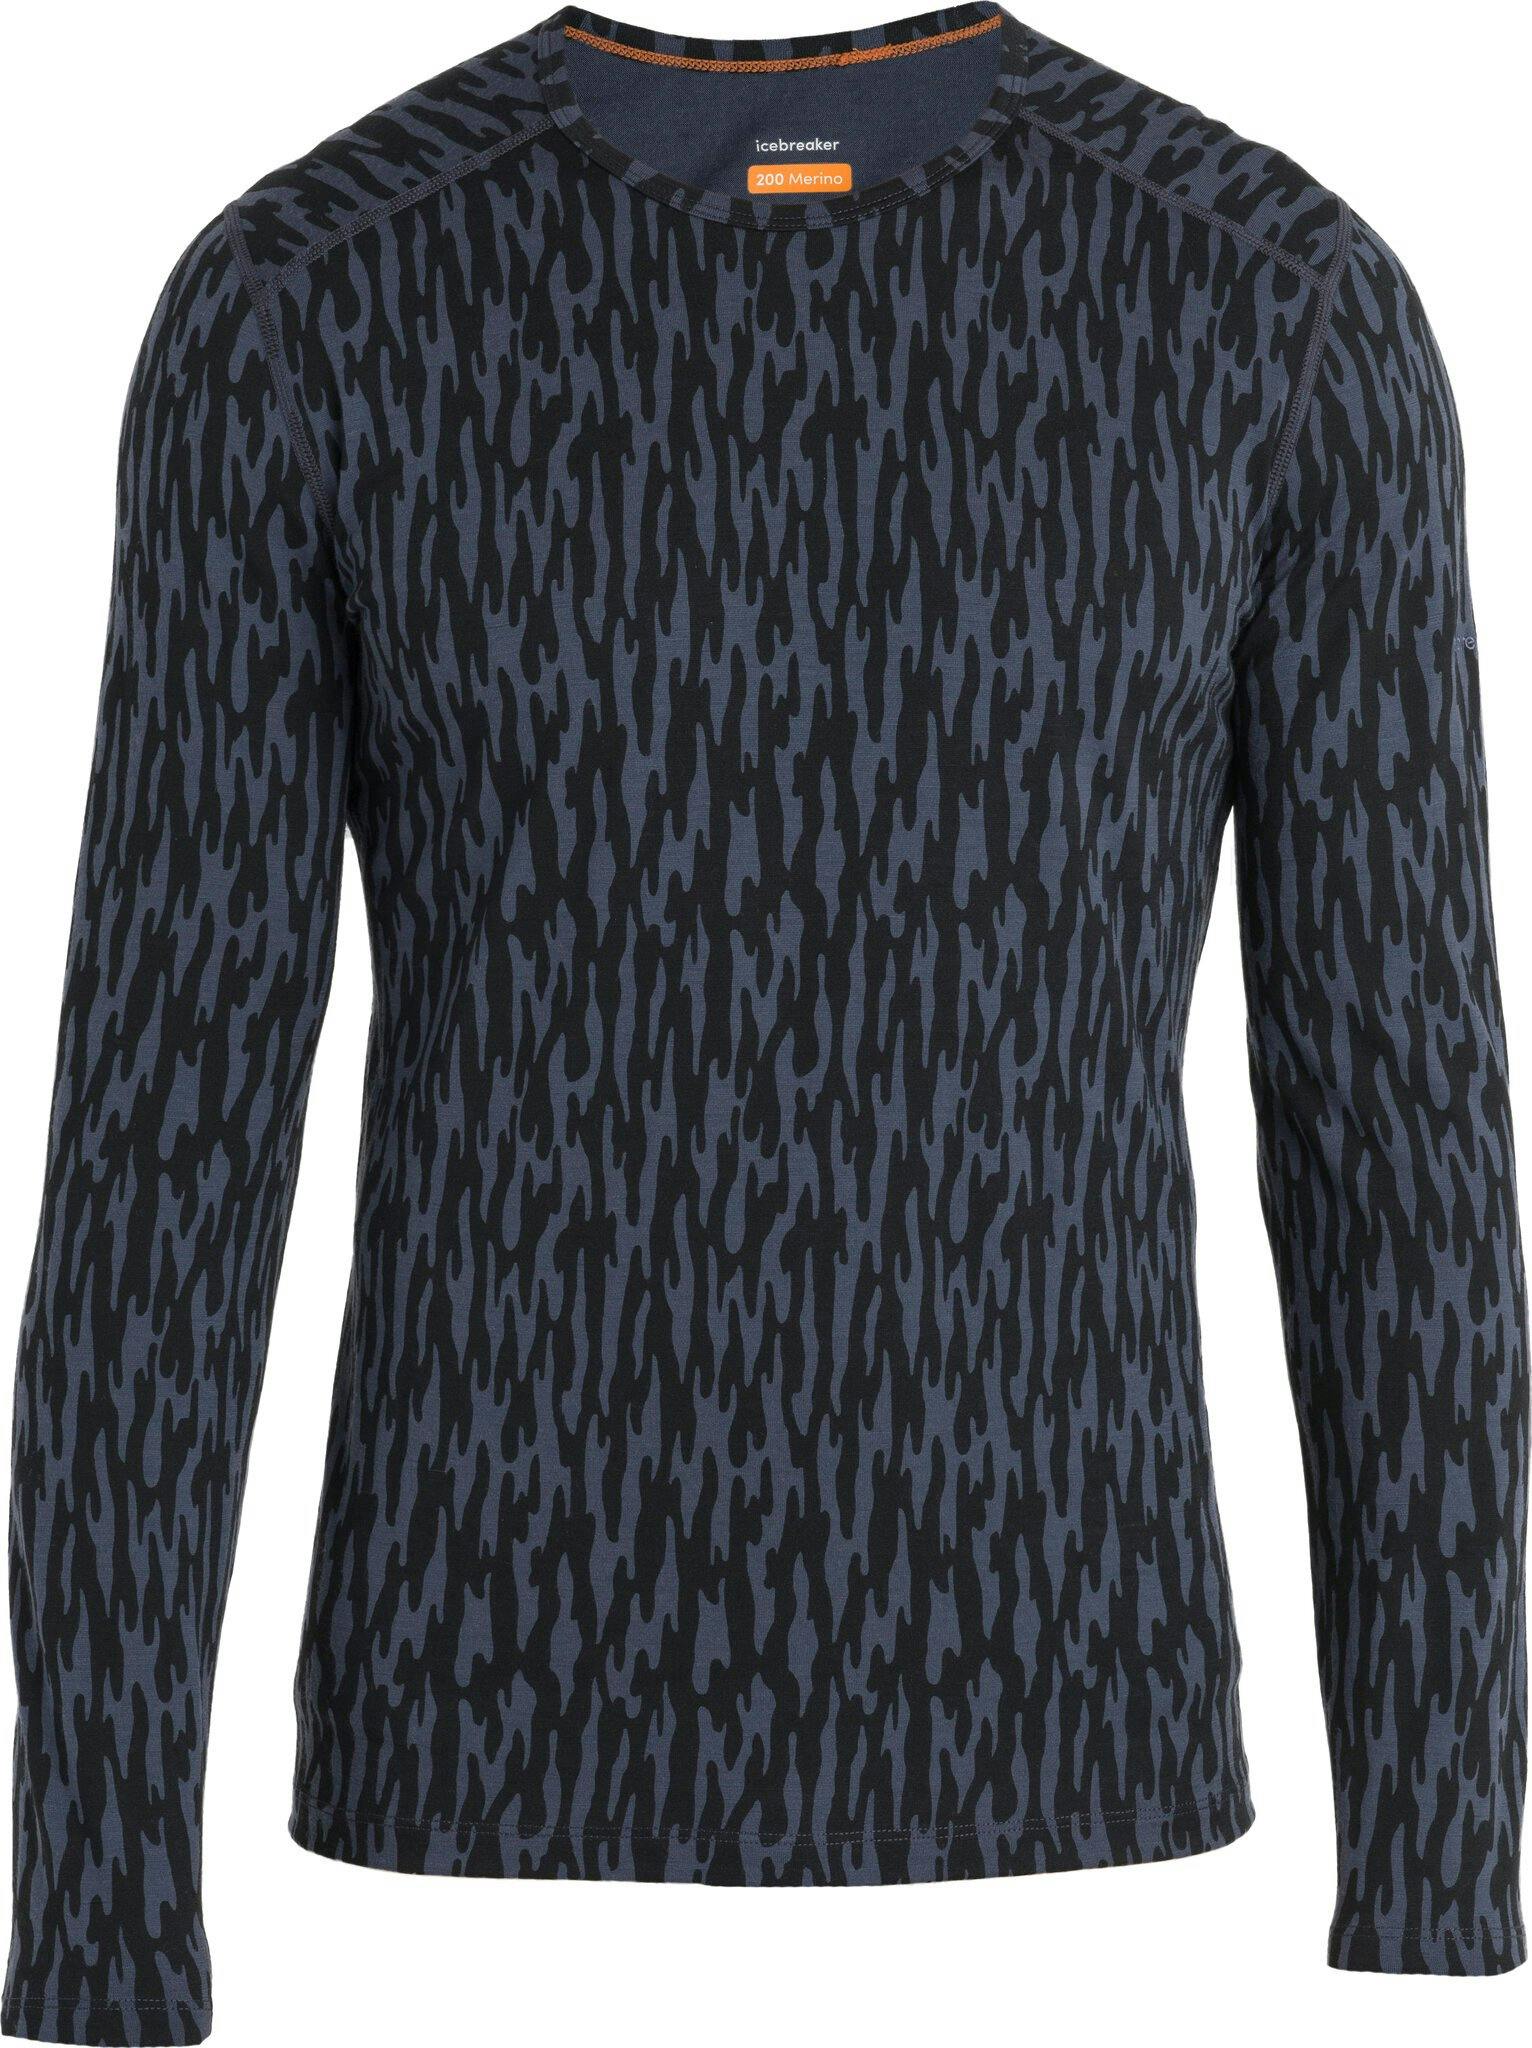 Product image for Merino 200 Oasis Glacial Flow Long Sleeve Thermal Top - Men's